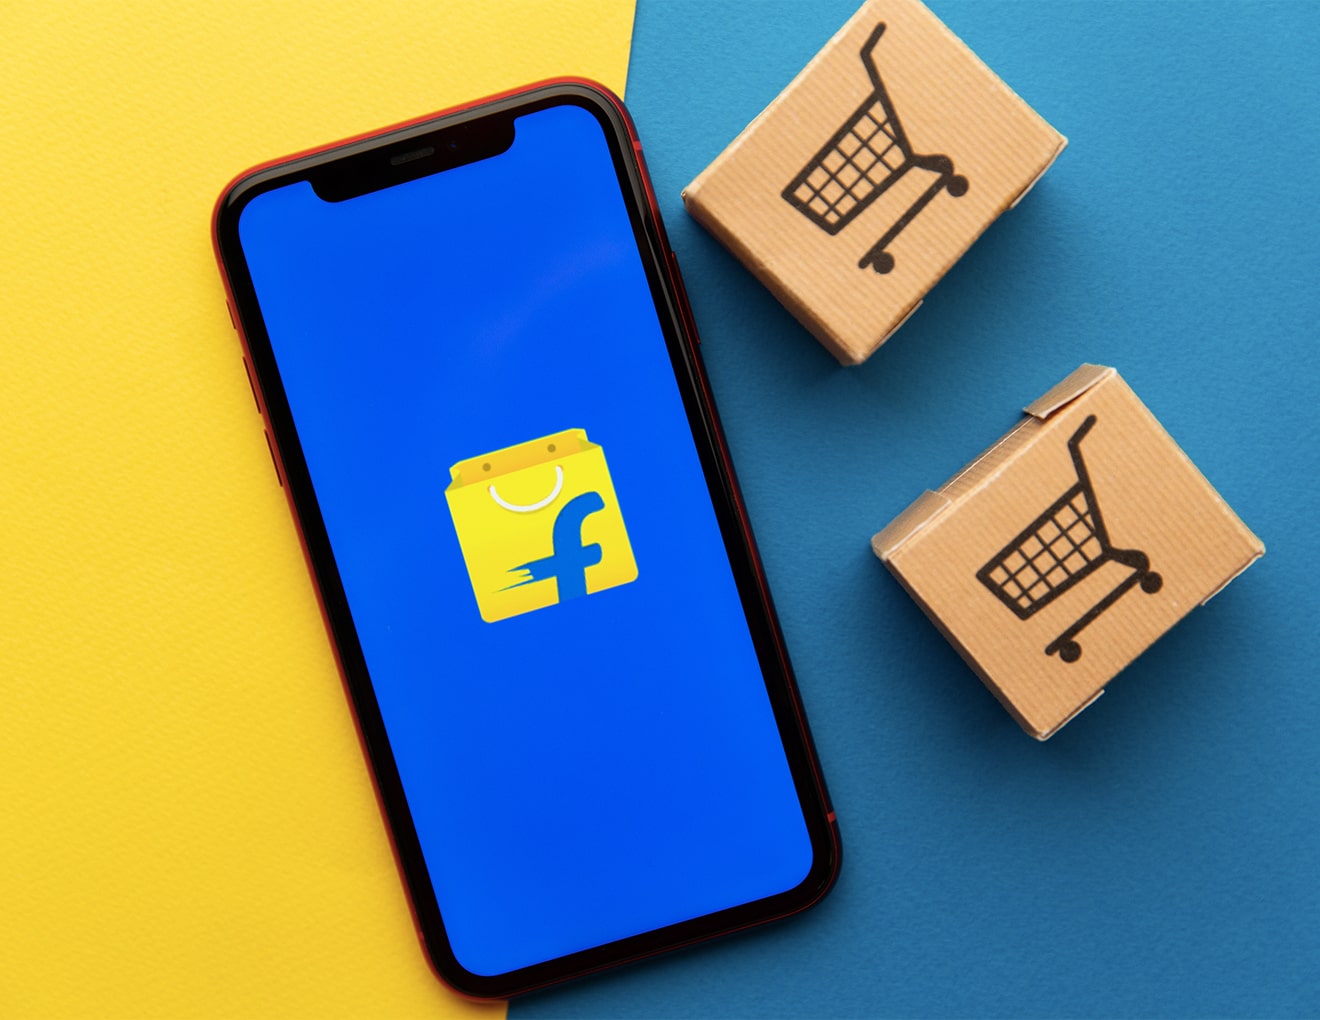 Flipkart, Ace Turtle JV To Bring Toys“R”Us Products To India